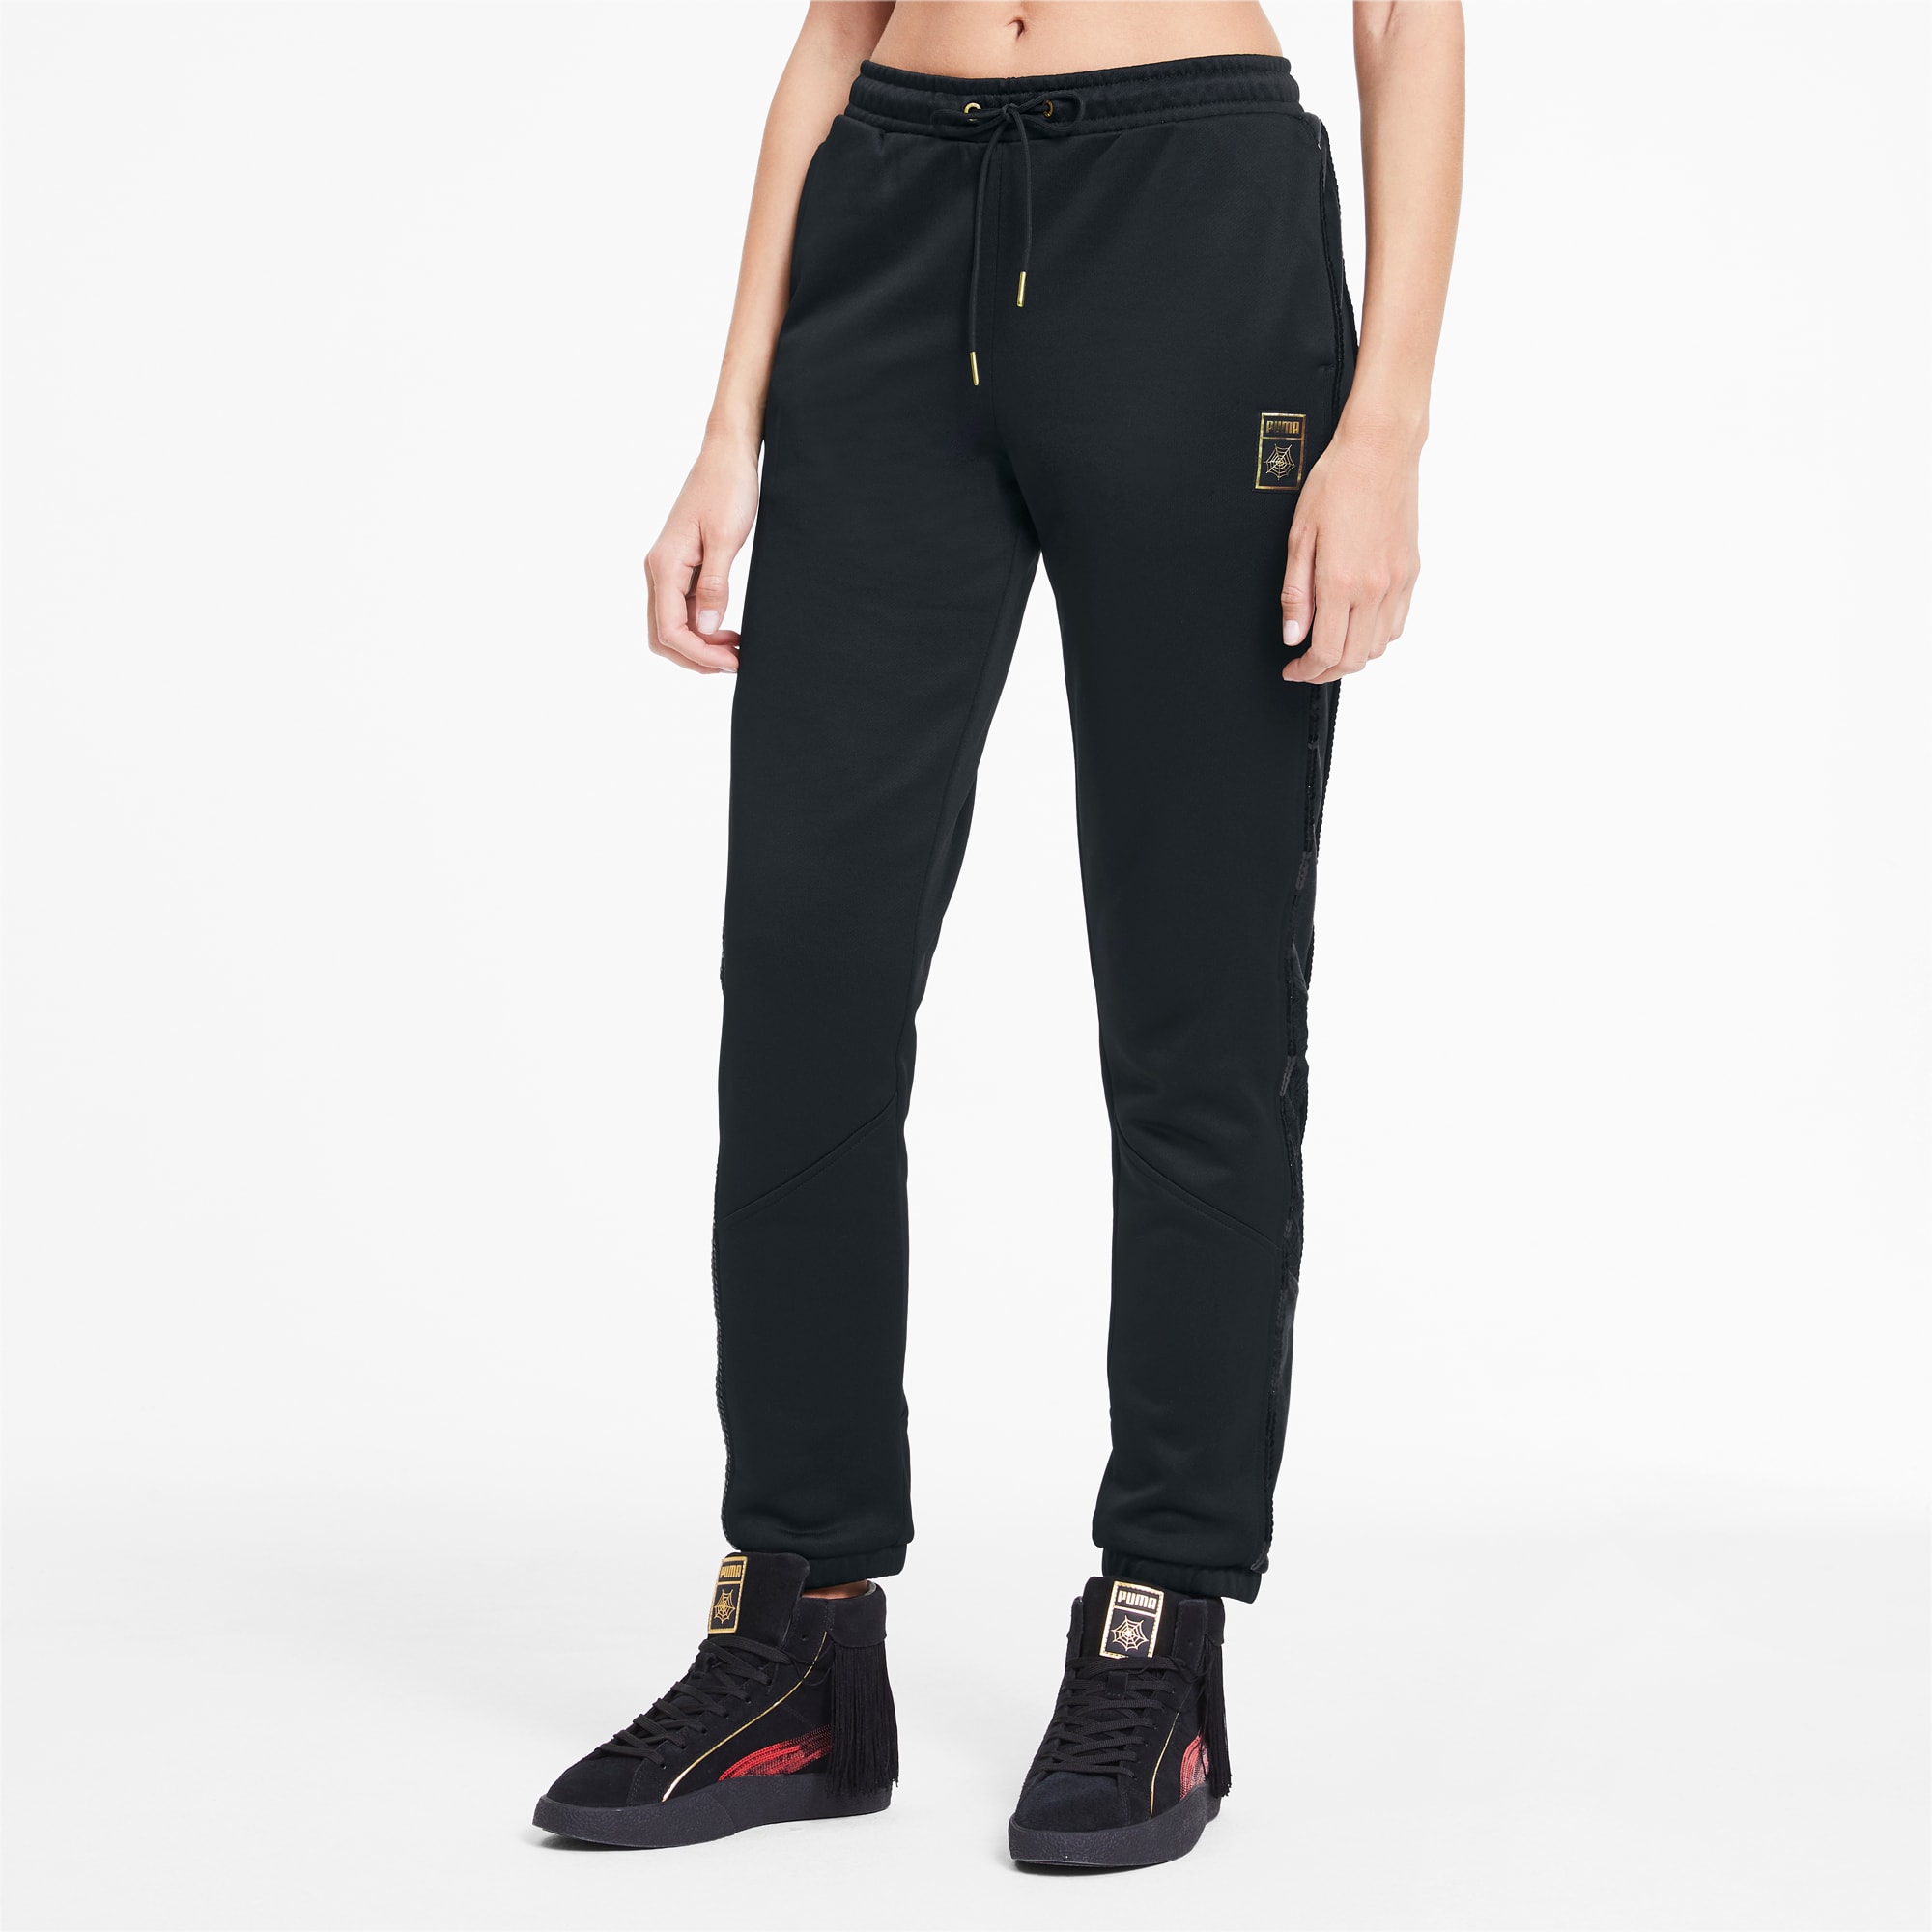 sports track pants for ladies